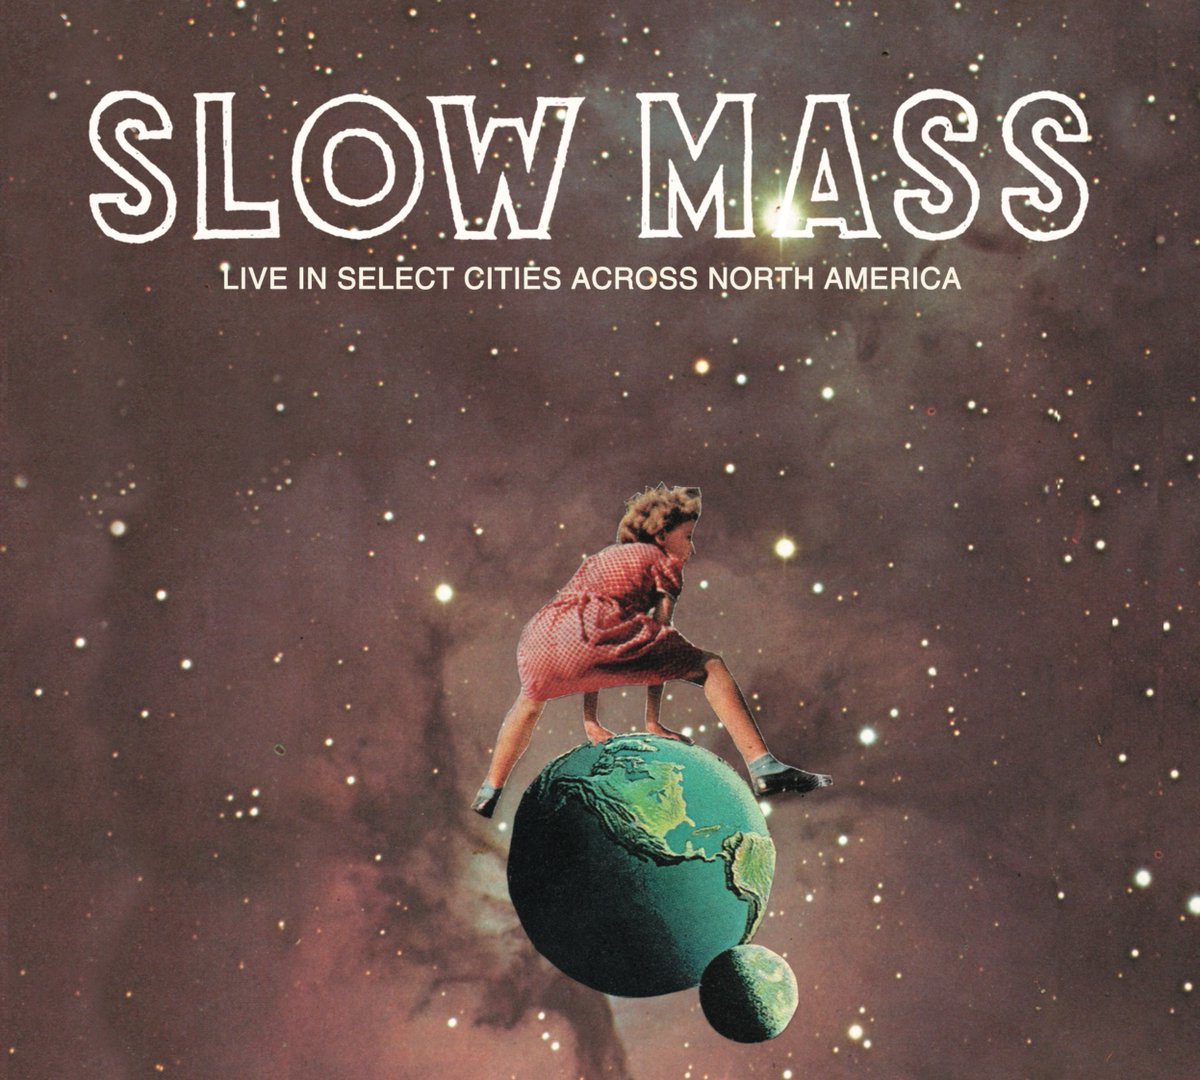 Slow Mass will be here May 7th! Tickets are on sale now at niletheater.com